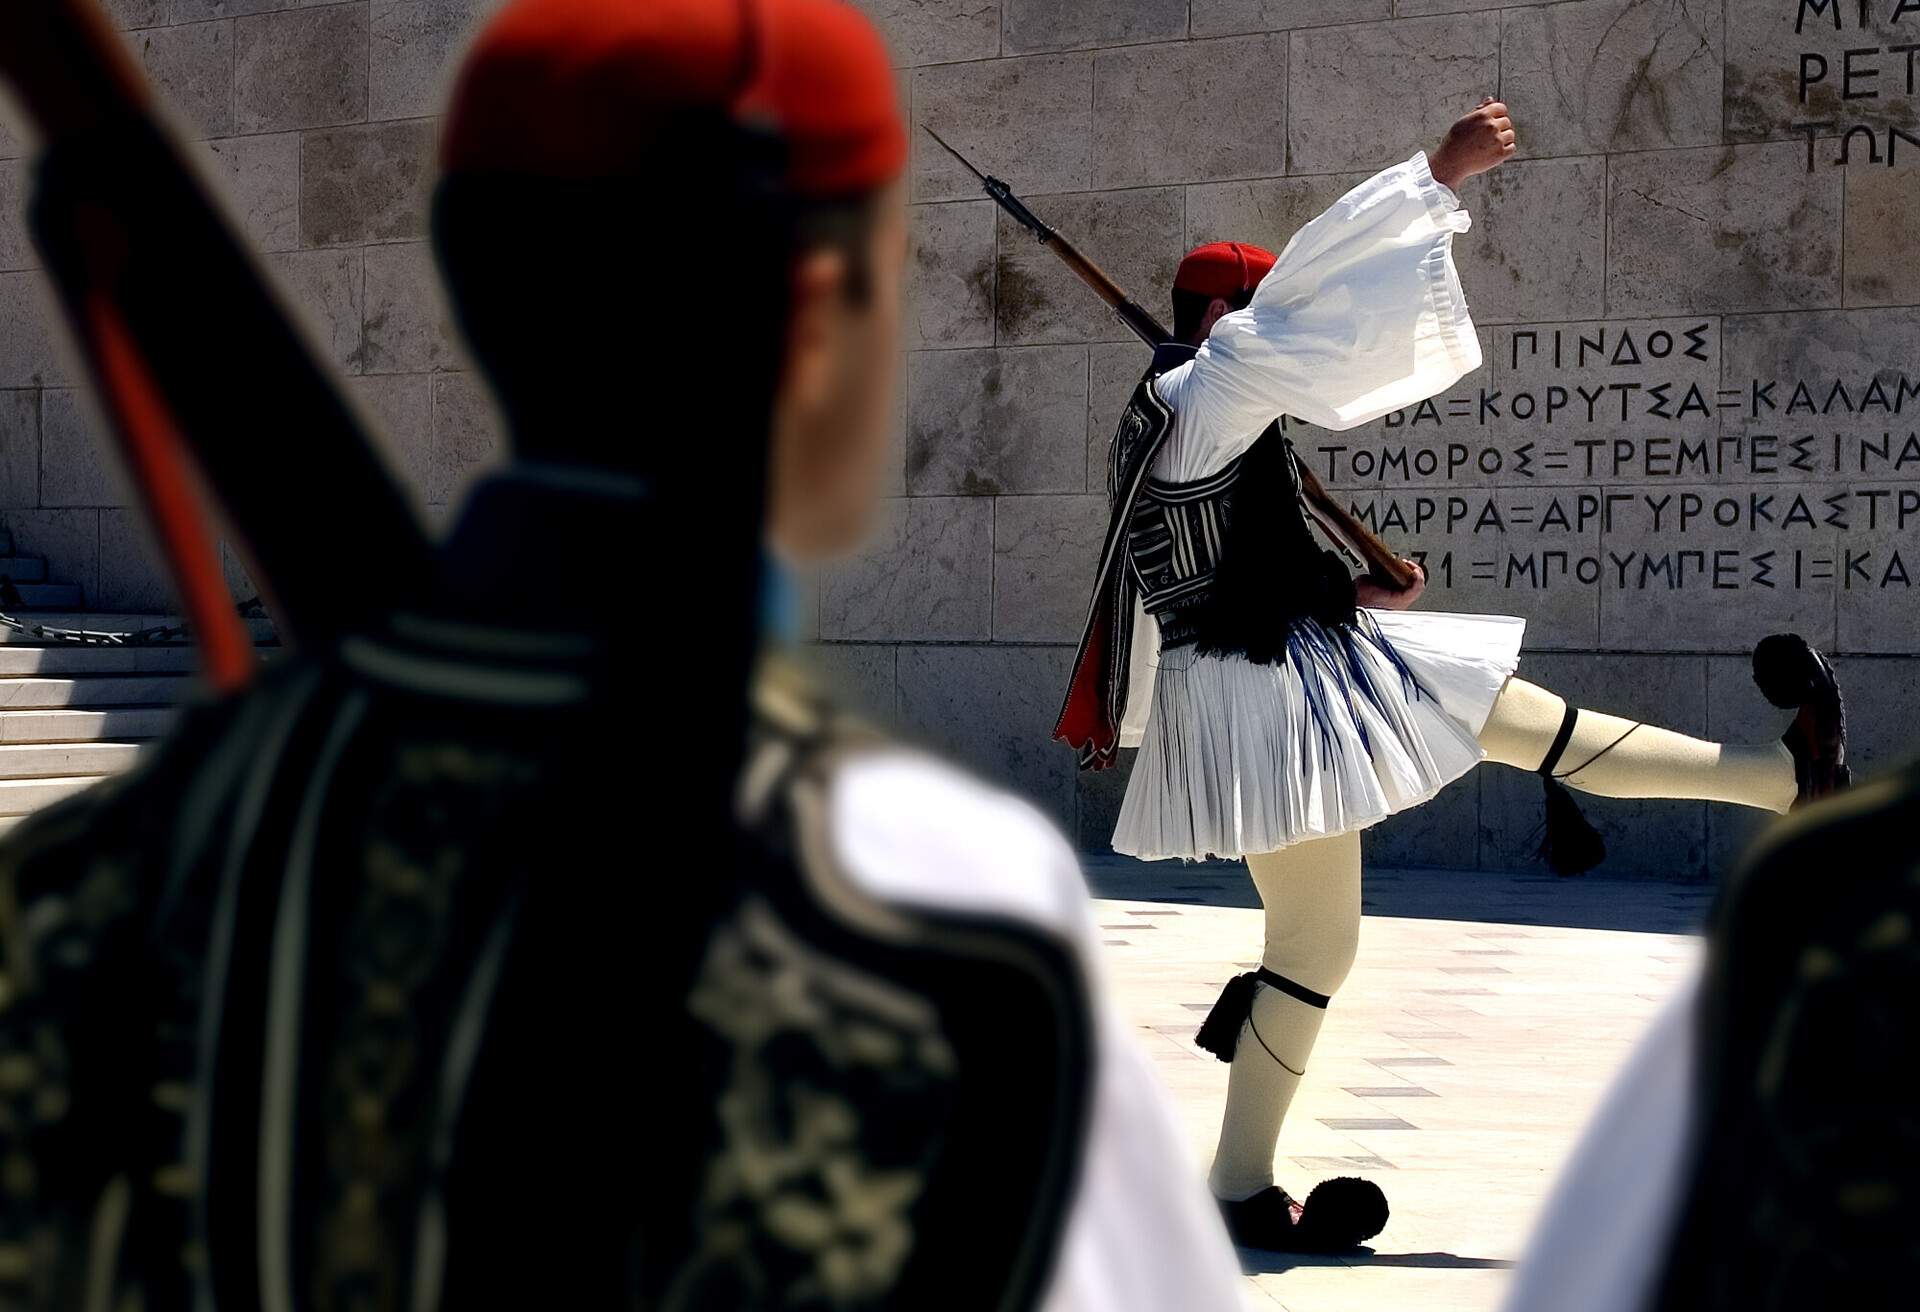 DEST_GREECE_ATHENS_SYNTAGMA-SQUARE_CHANGE-OF-GUARD_GettyImages-125059065